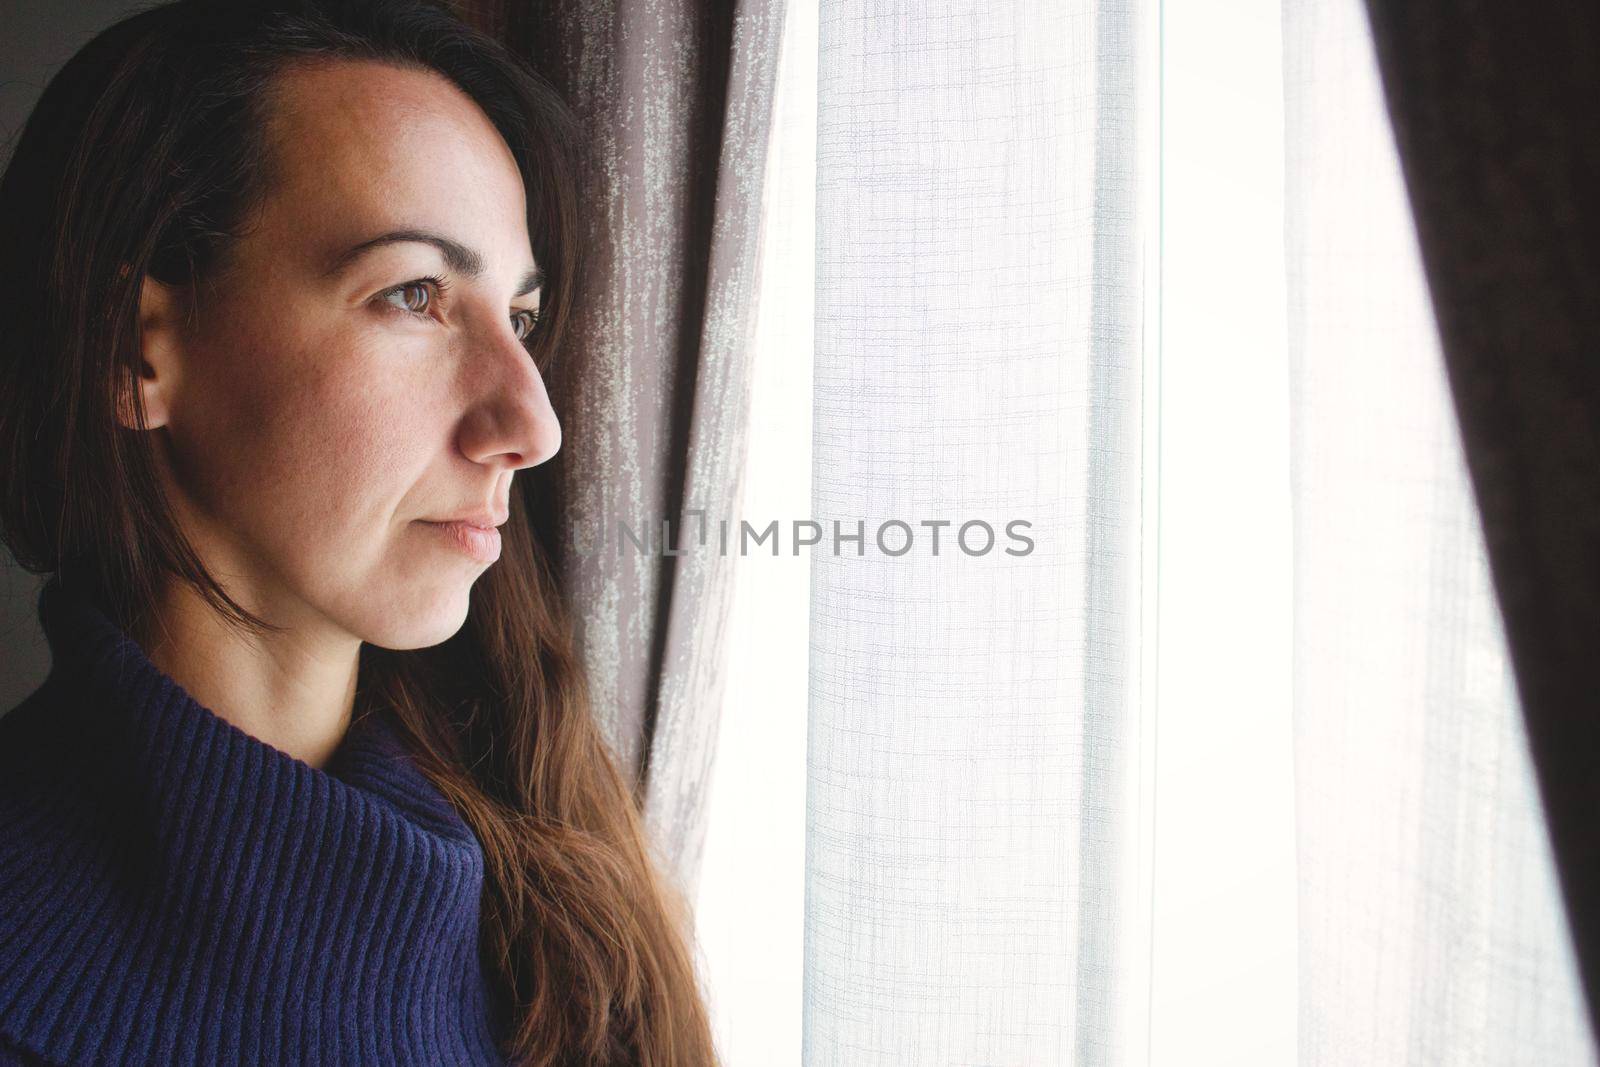 Young attractive woman looking pensively out of a window with curtain and glowing white light